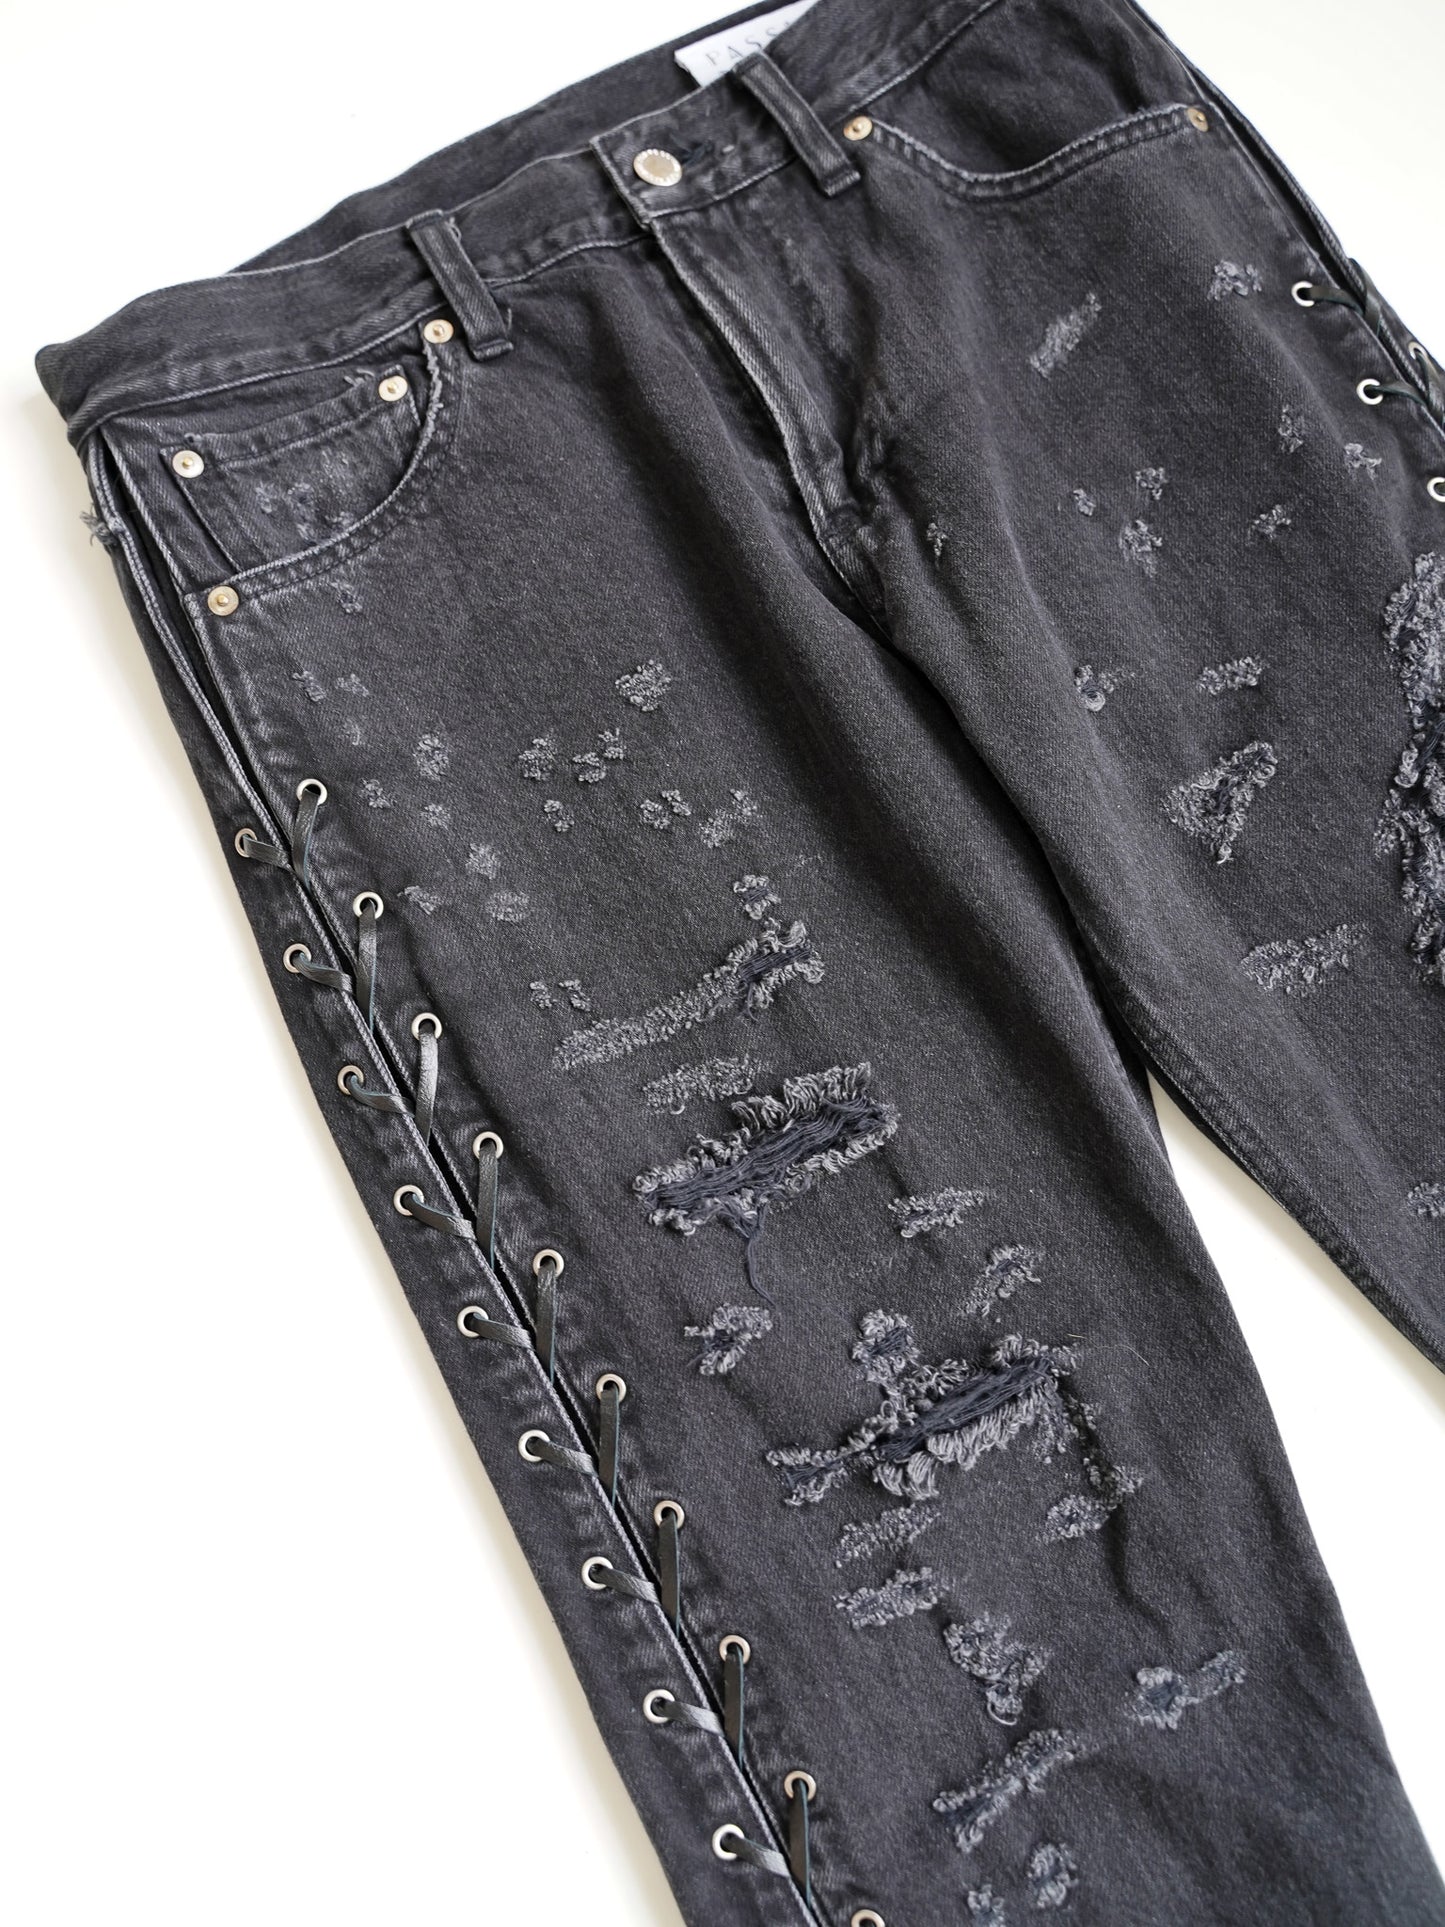 el conductorH LACE UP DISTRESSED JEAN TROUSERS